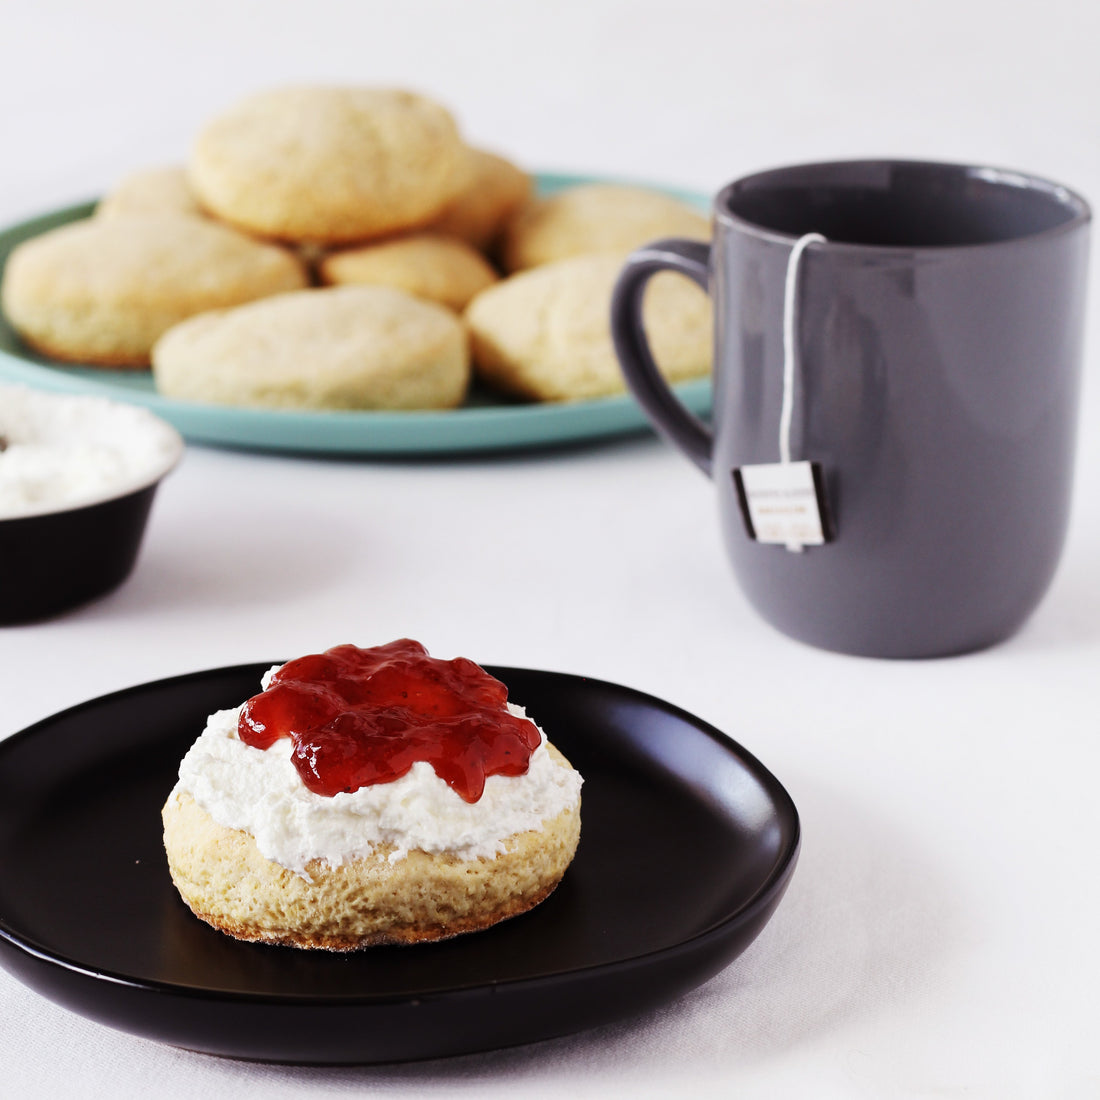 10 Ways to Make Your Scones Even More Delicious!